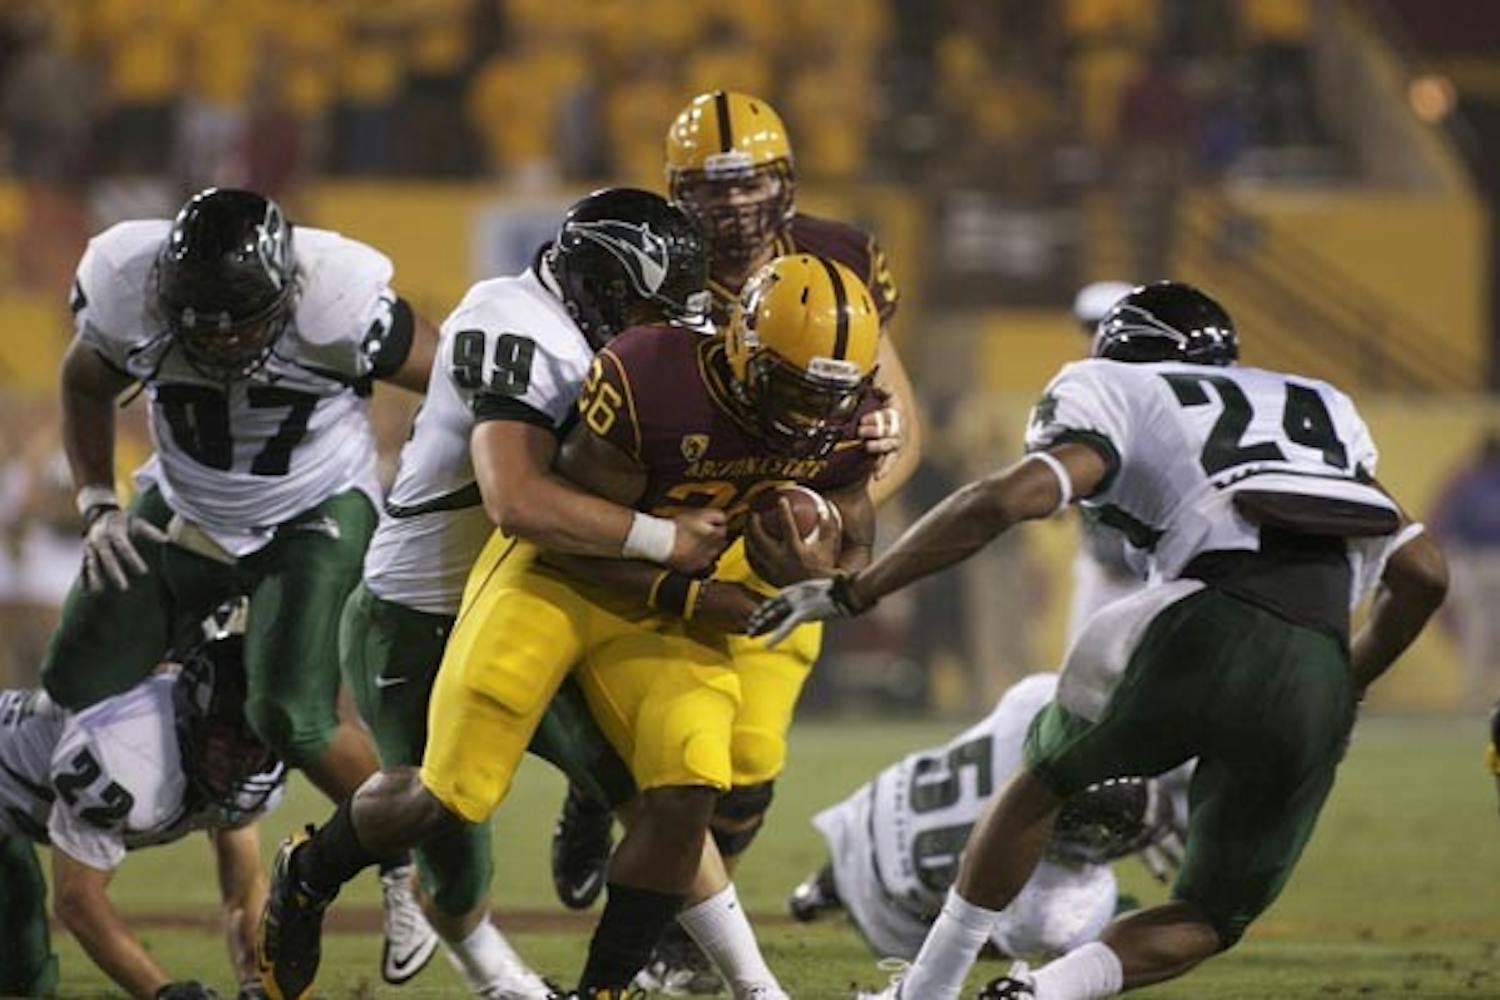 HEAVY LOAD: Sophomore running back Cameron Marshall is taken down by Portland State defenders in ASU's first game of the season. The Sun Devils hope Marshall can help match Oregon's speedy ground game. (Photo by Scott Stuk)